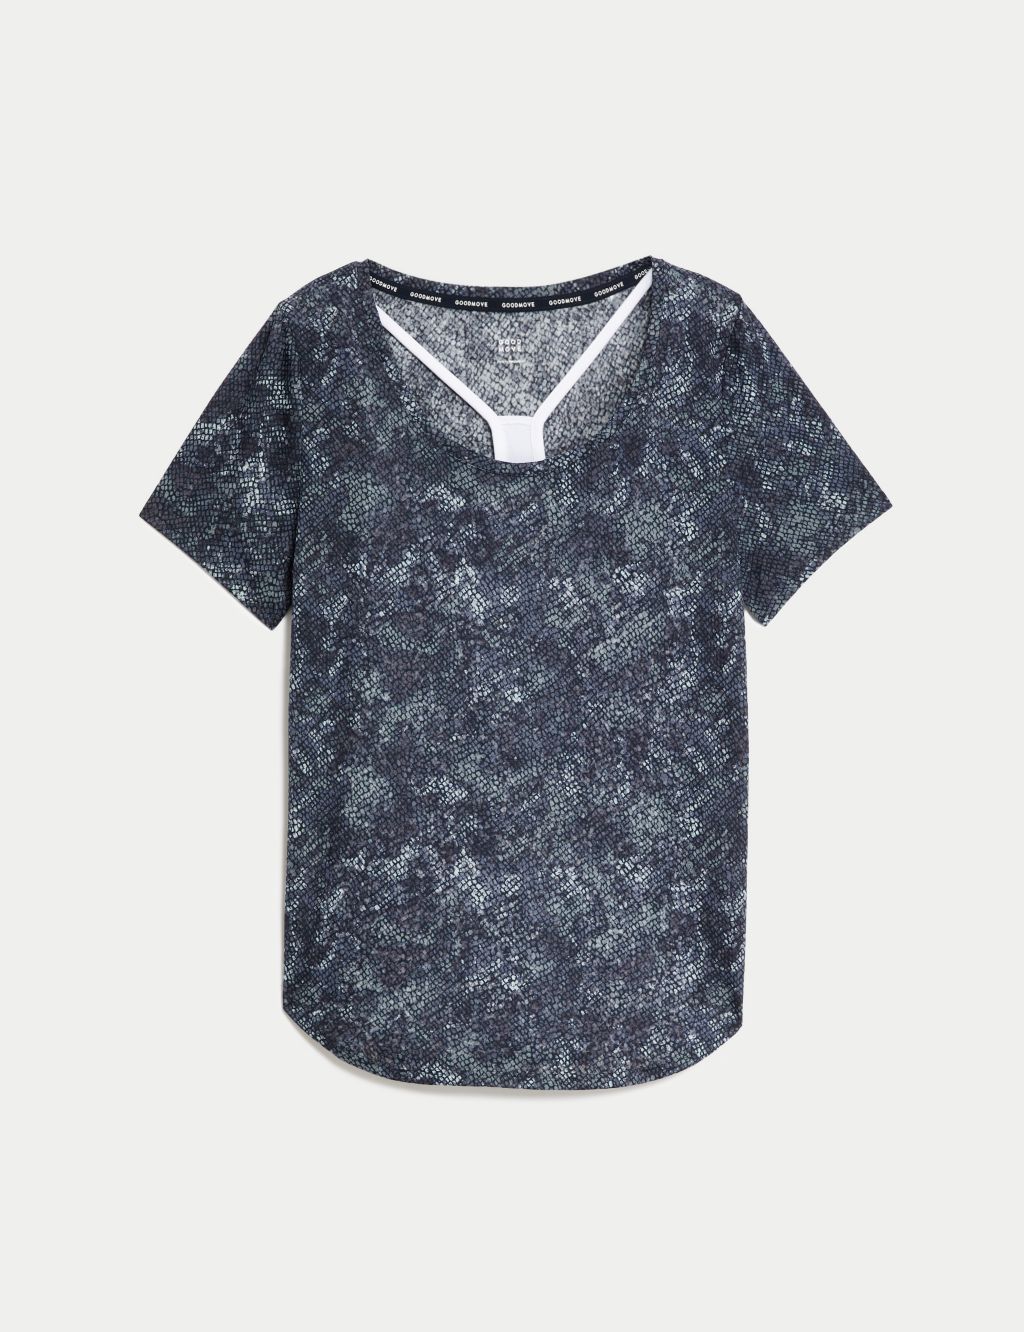 Printed Scoop Neck 2-in-1 T-Shirt image 2